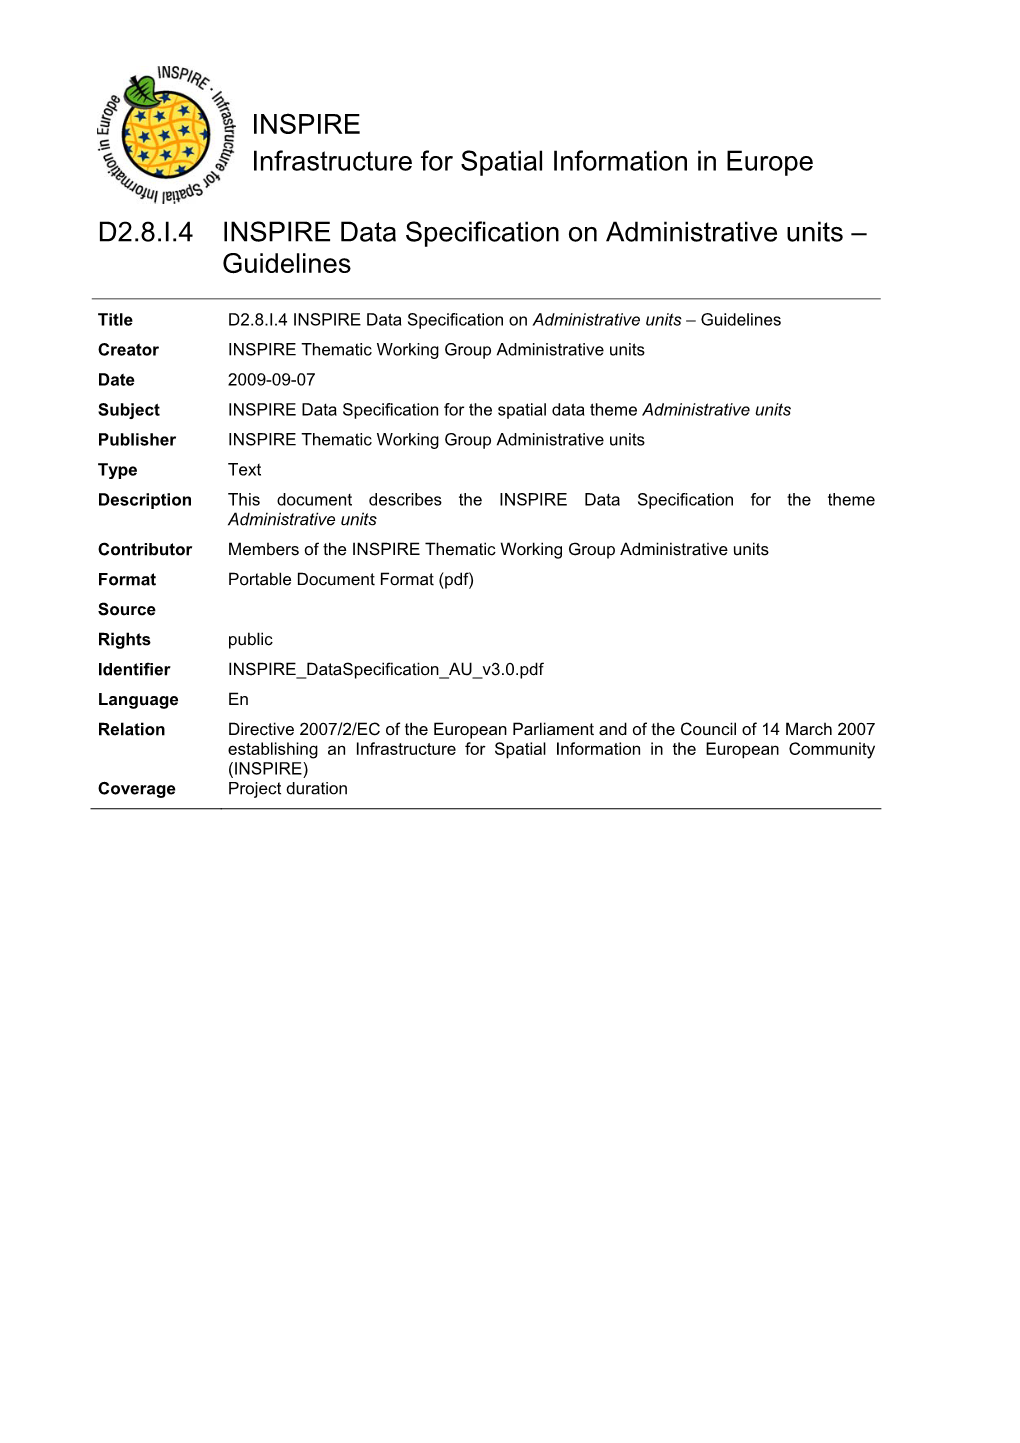 Data Specification on Administrative Units – Guidelines